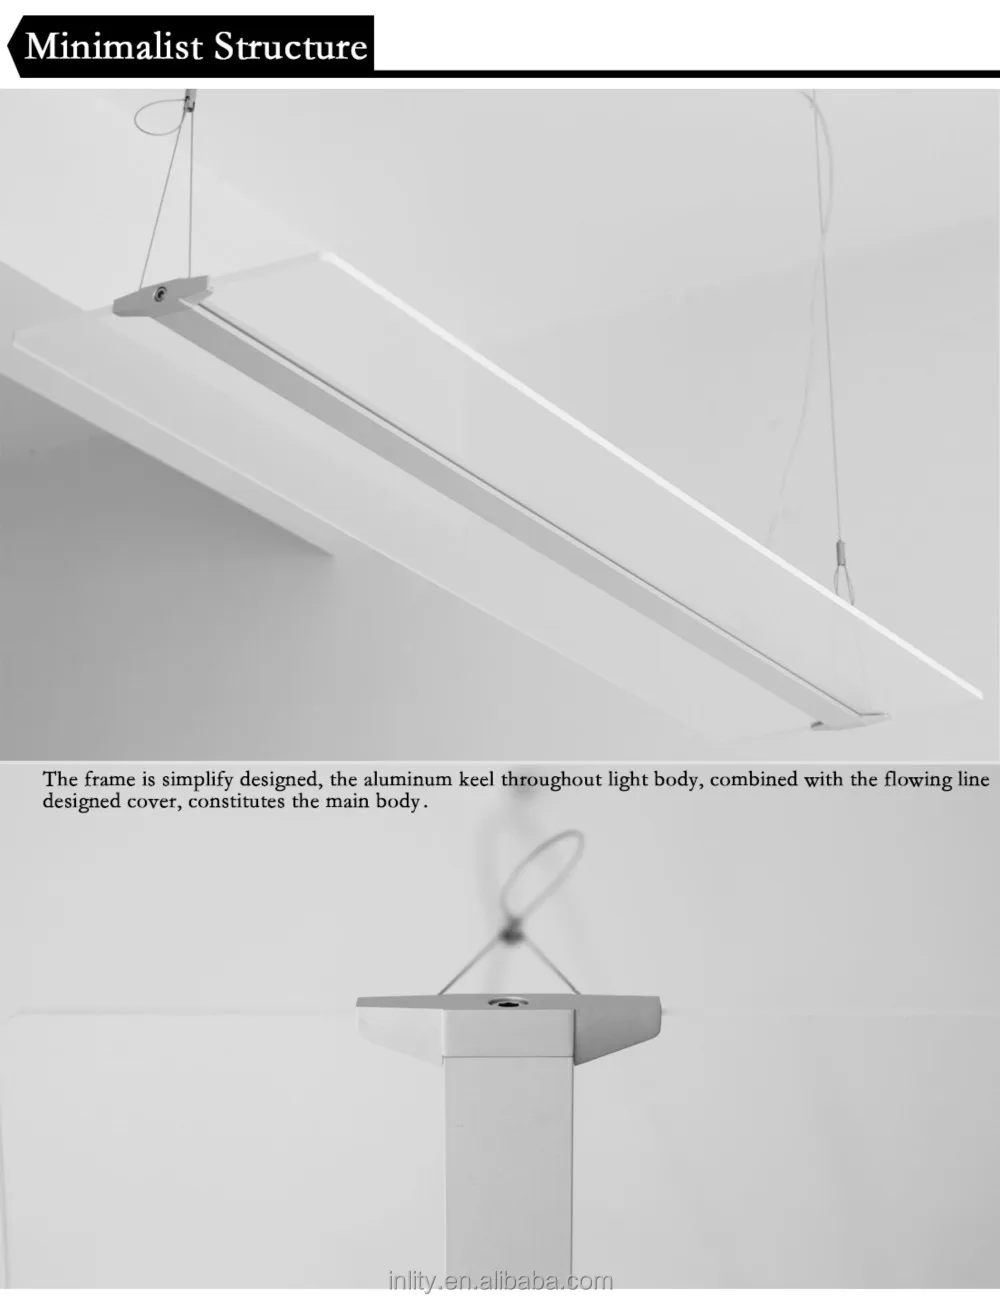 PDX3 suspended clear panel led ceiling light